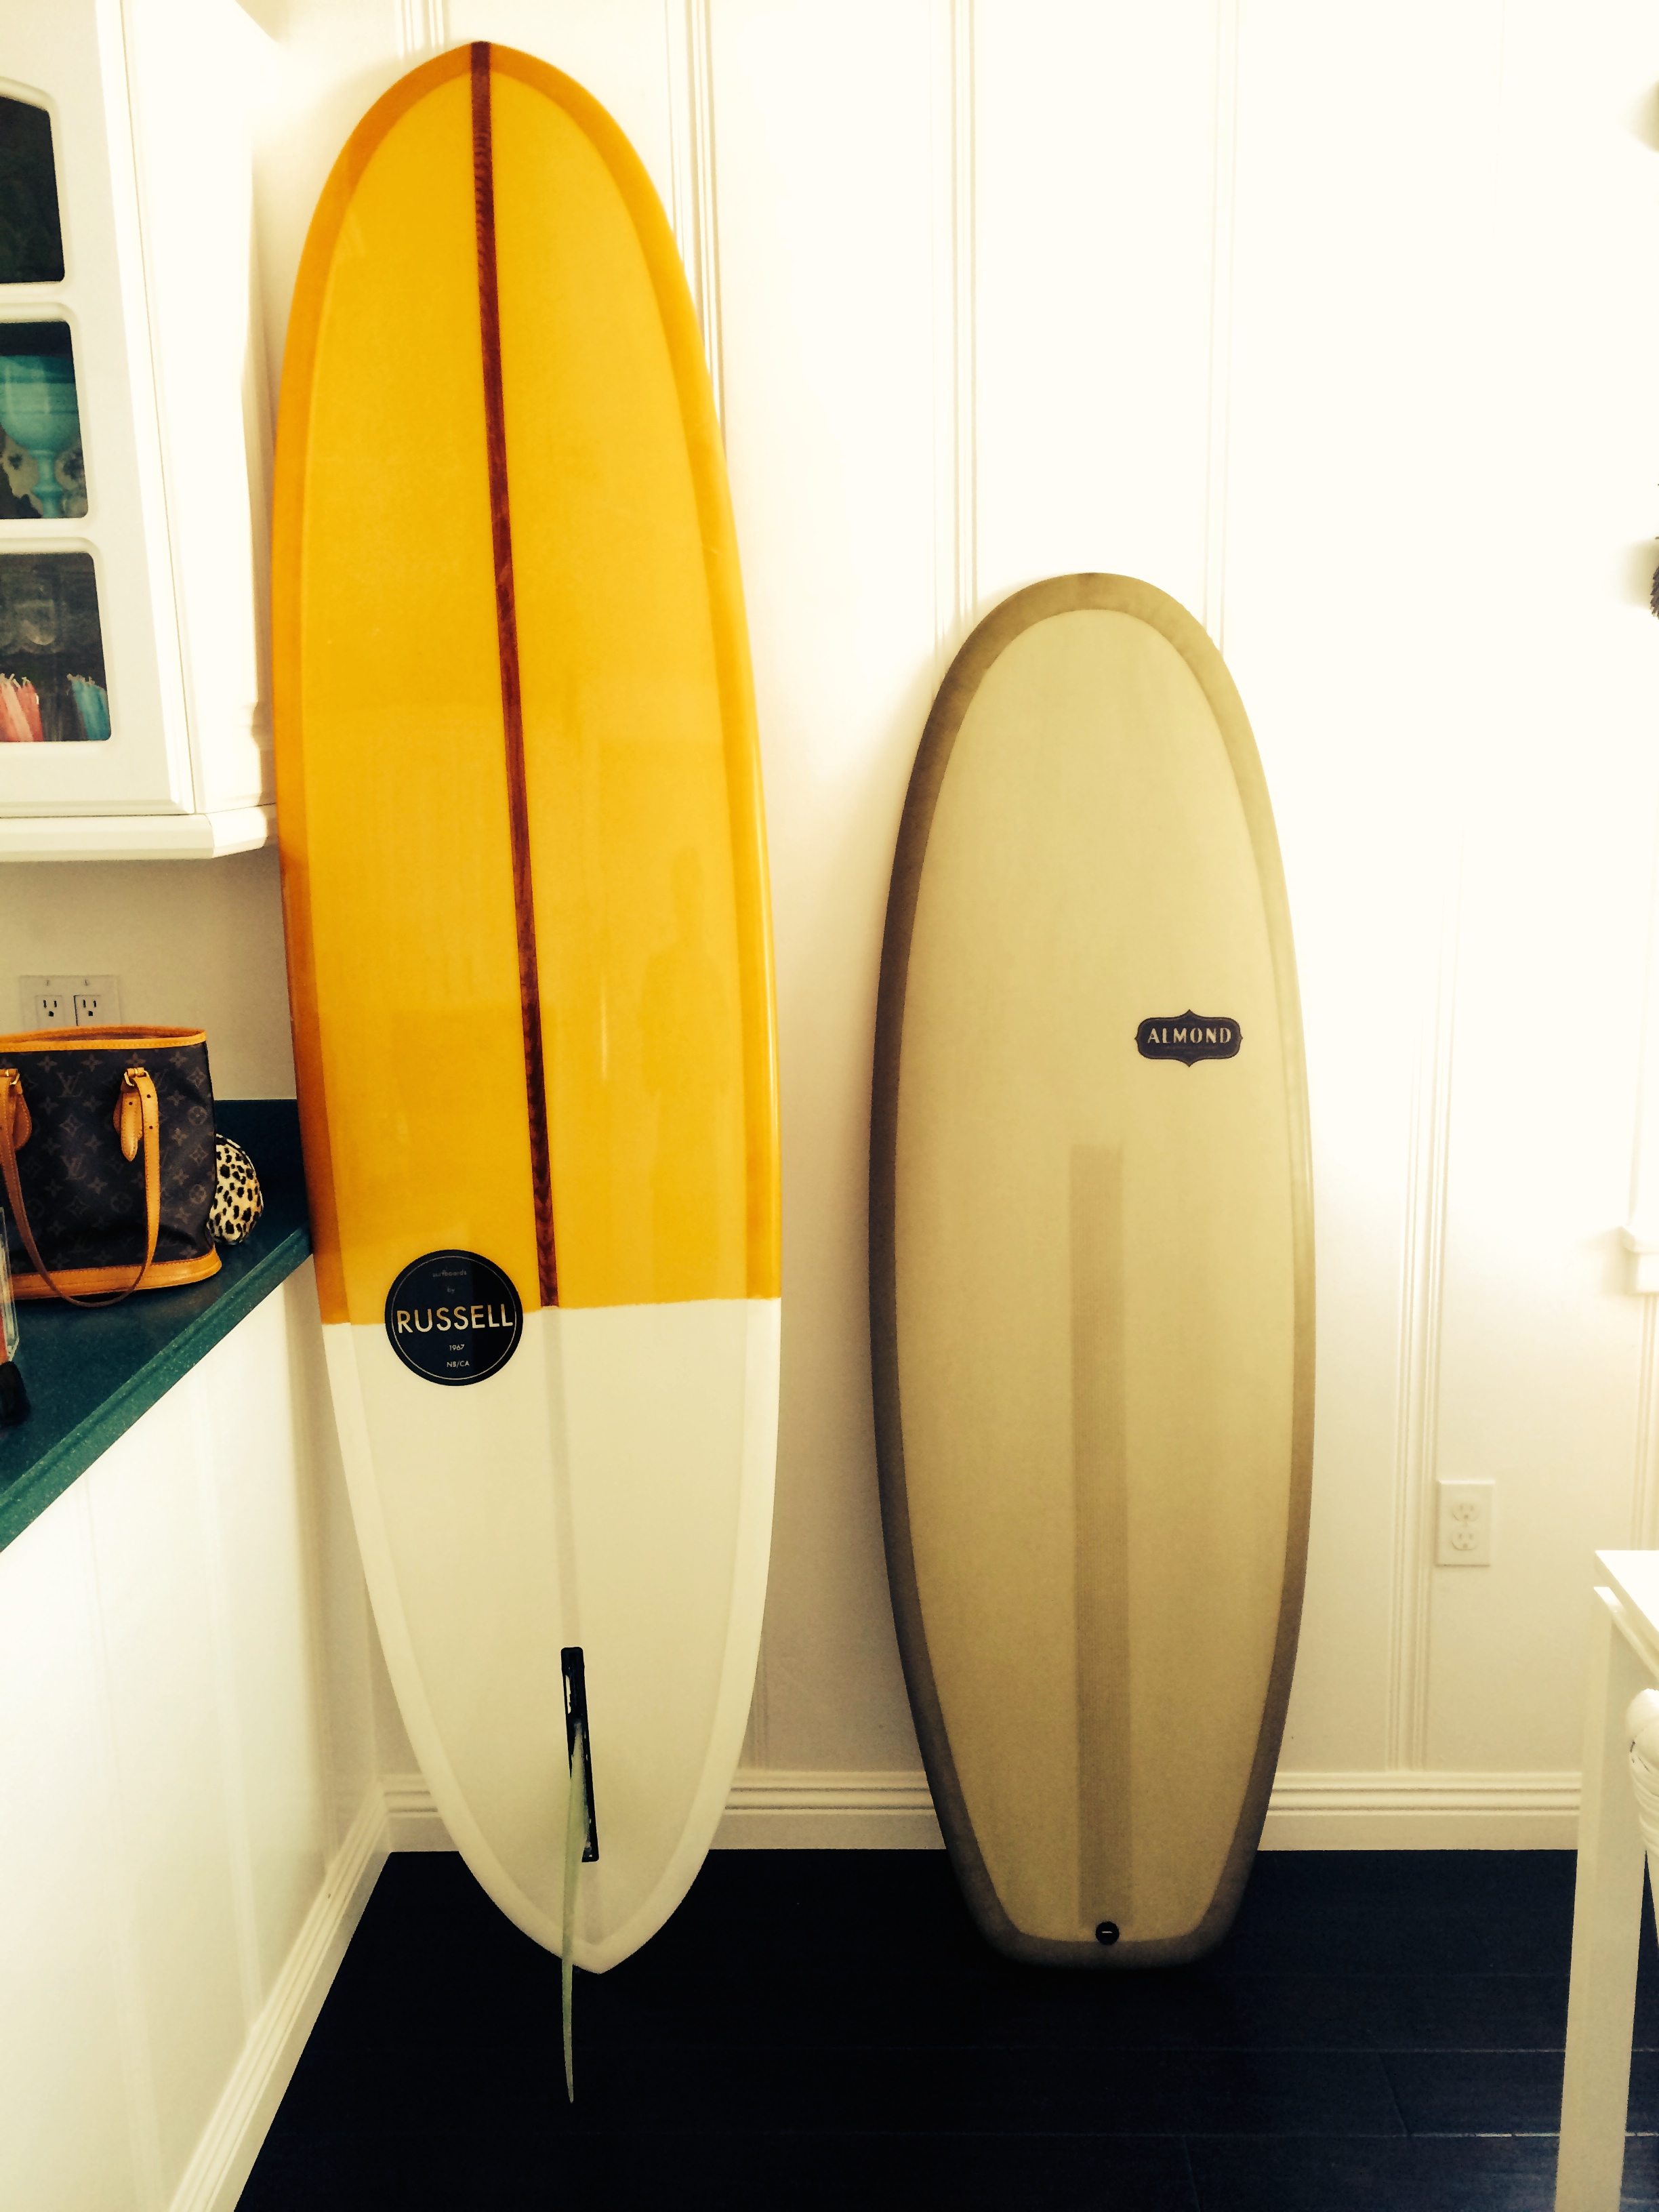 My Surfboards